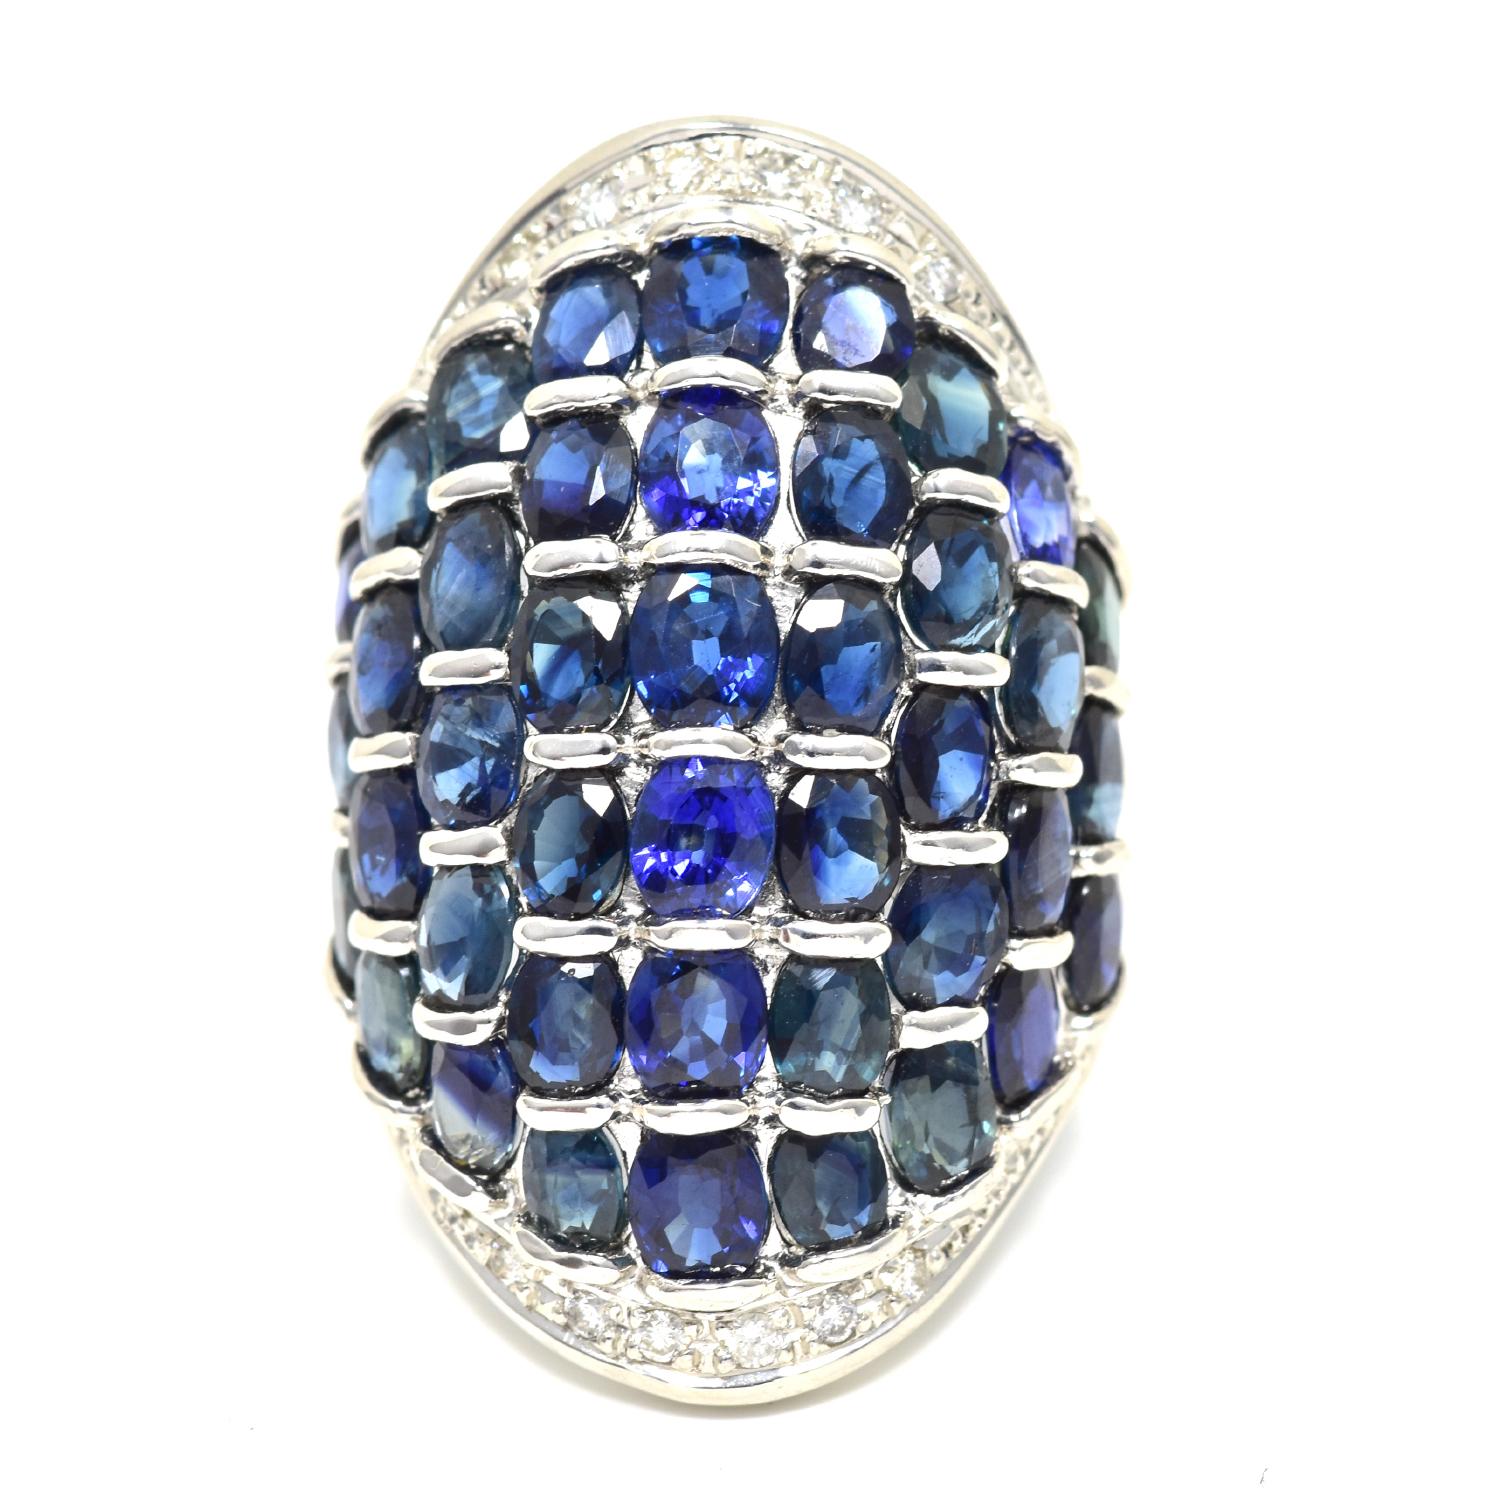 
Style: Cocktail Ring

Metal Type: Platinum

Stones: 42 Round Sapphires

and Pave Diamonds

Total Item Weight (grams): 13.9 grams

Width: Approx. 3.5 cm

Ring Size: 6.5

​​​Includes: Brilliance Jewels 2 Year Warranty

Brilliance Jewels Ring Packaging